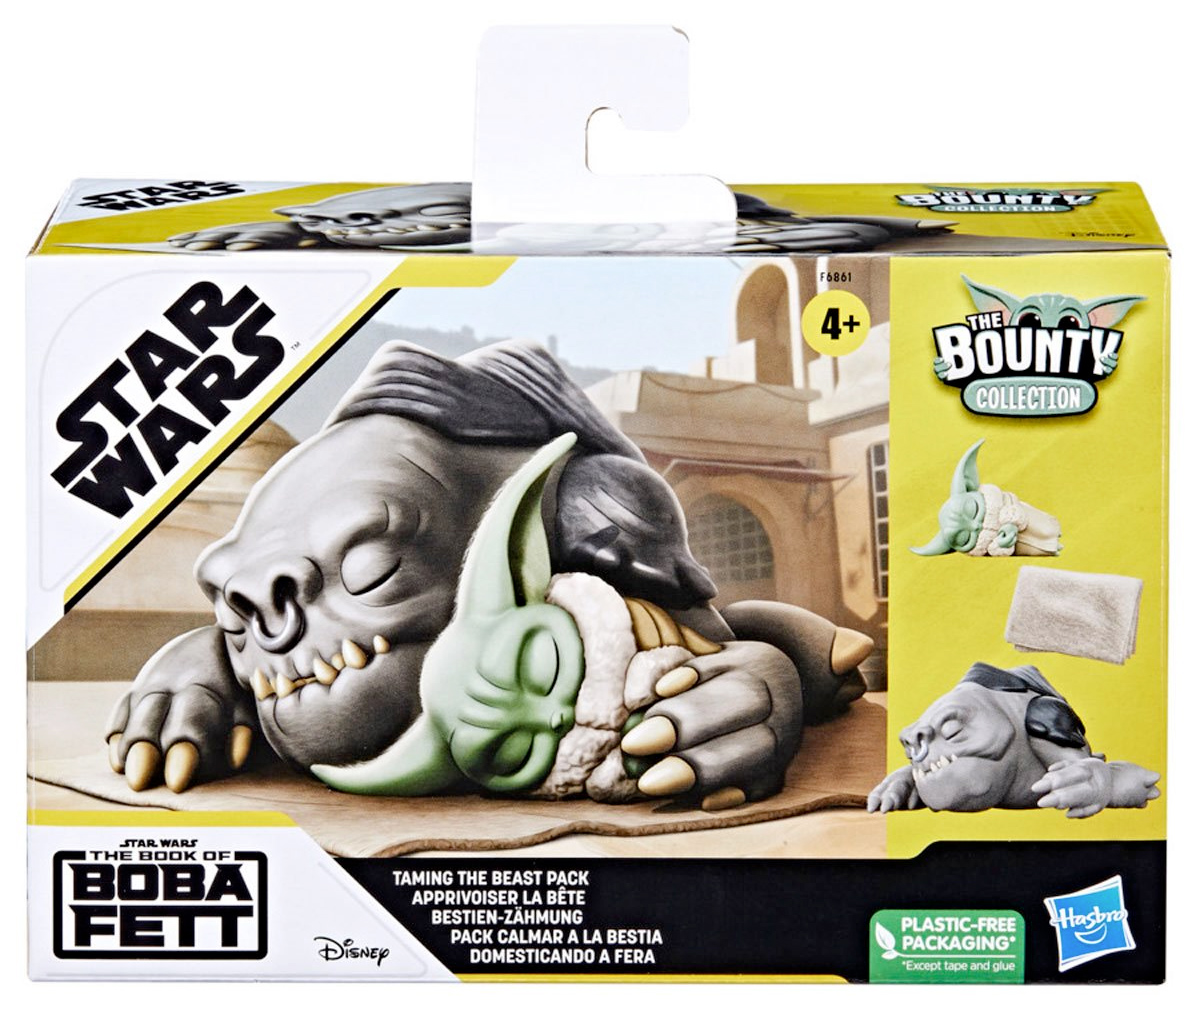 Star Wars The Bounty Collection Series 7 Mini Figures